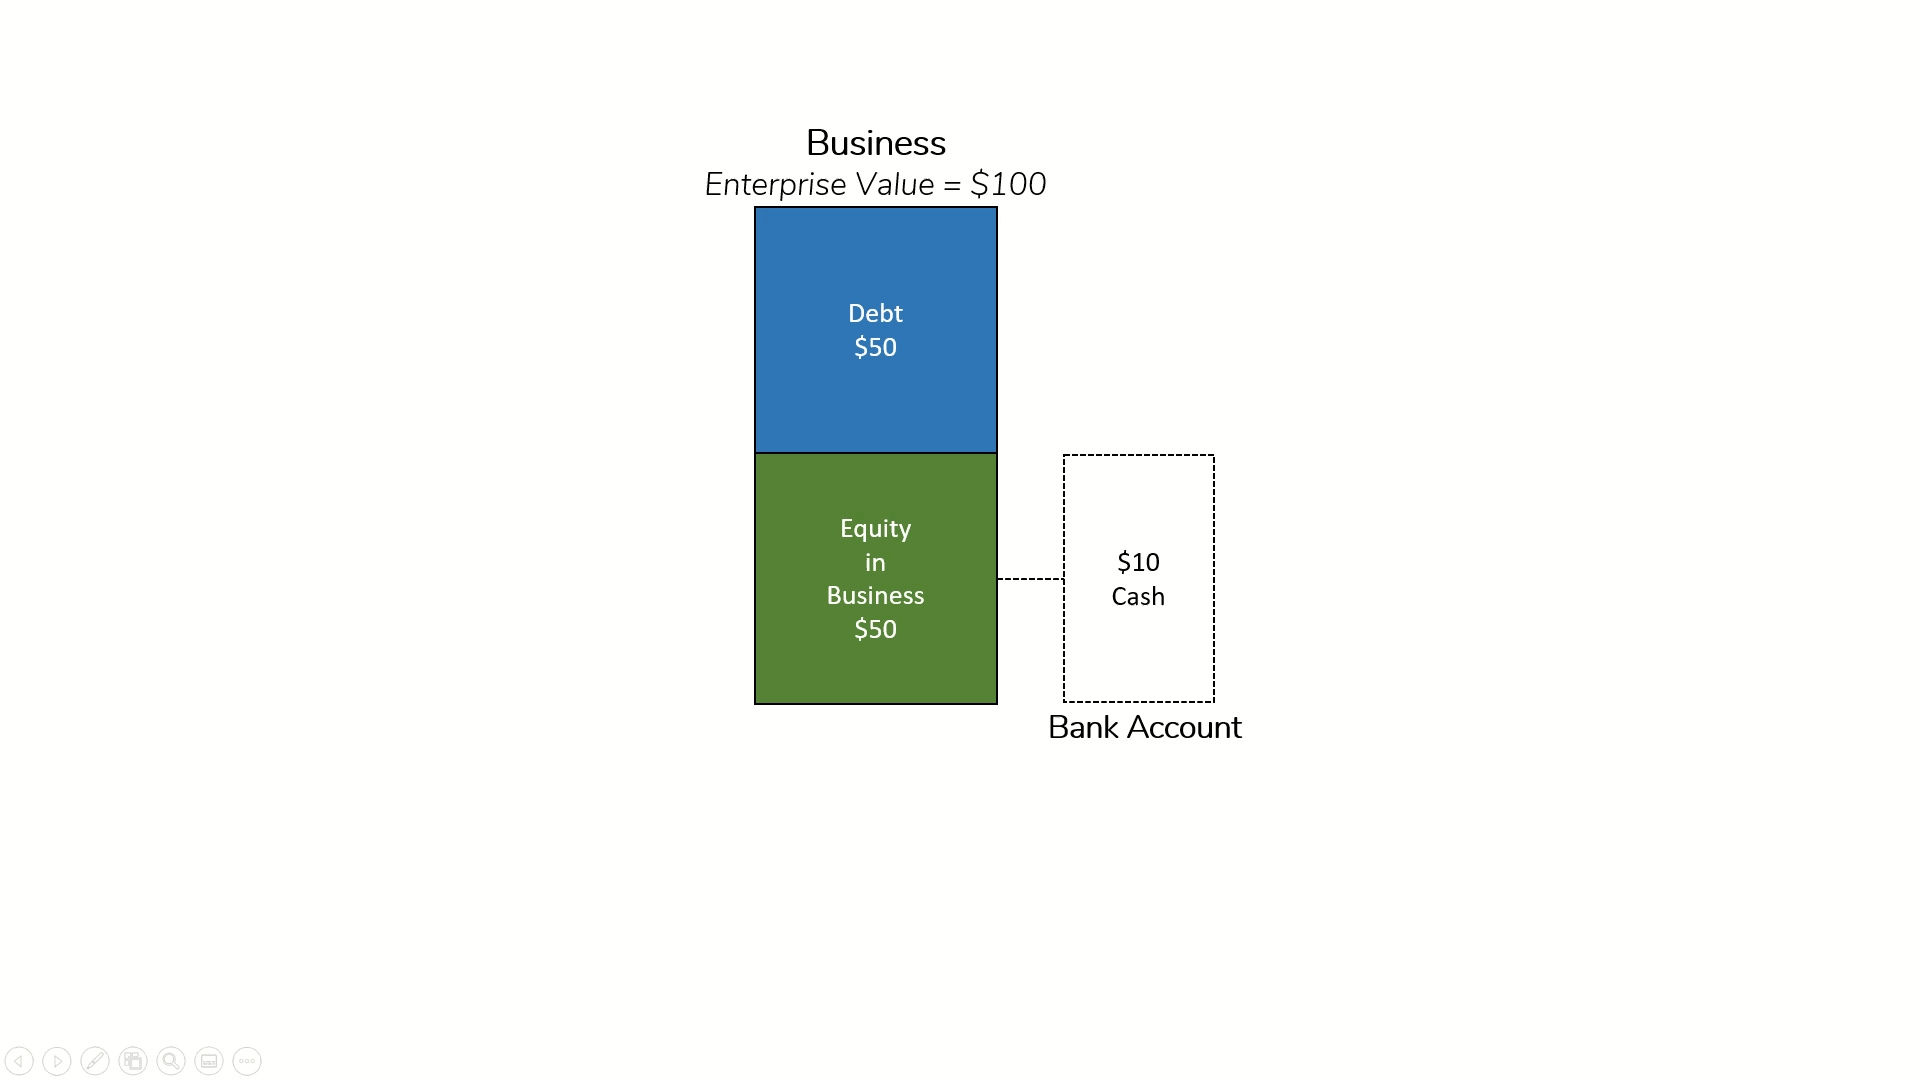 Illustration showing shares of a business with multiple owners through stocks